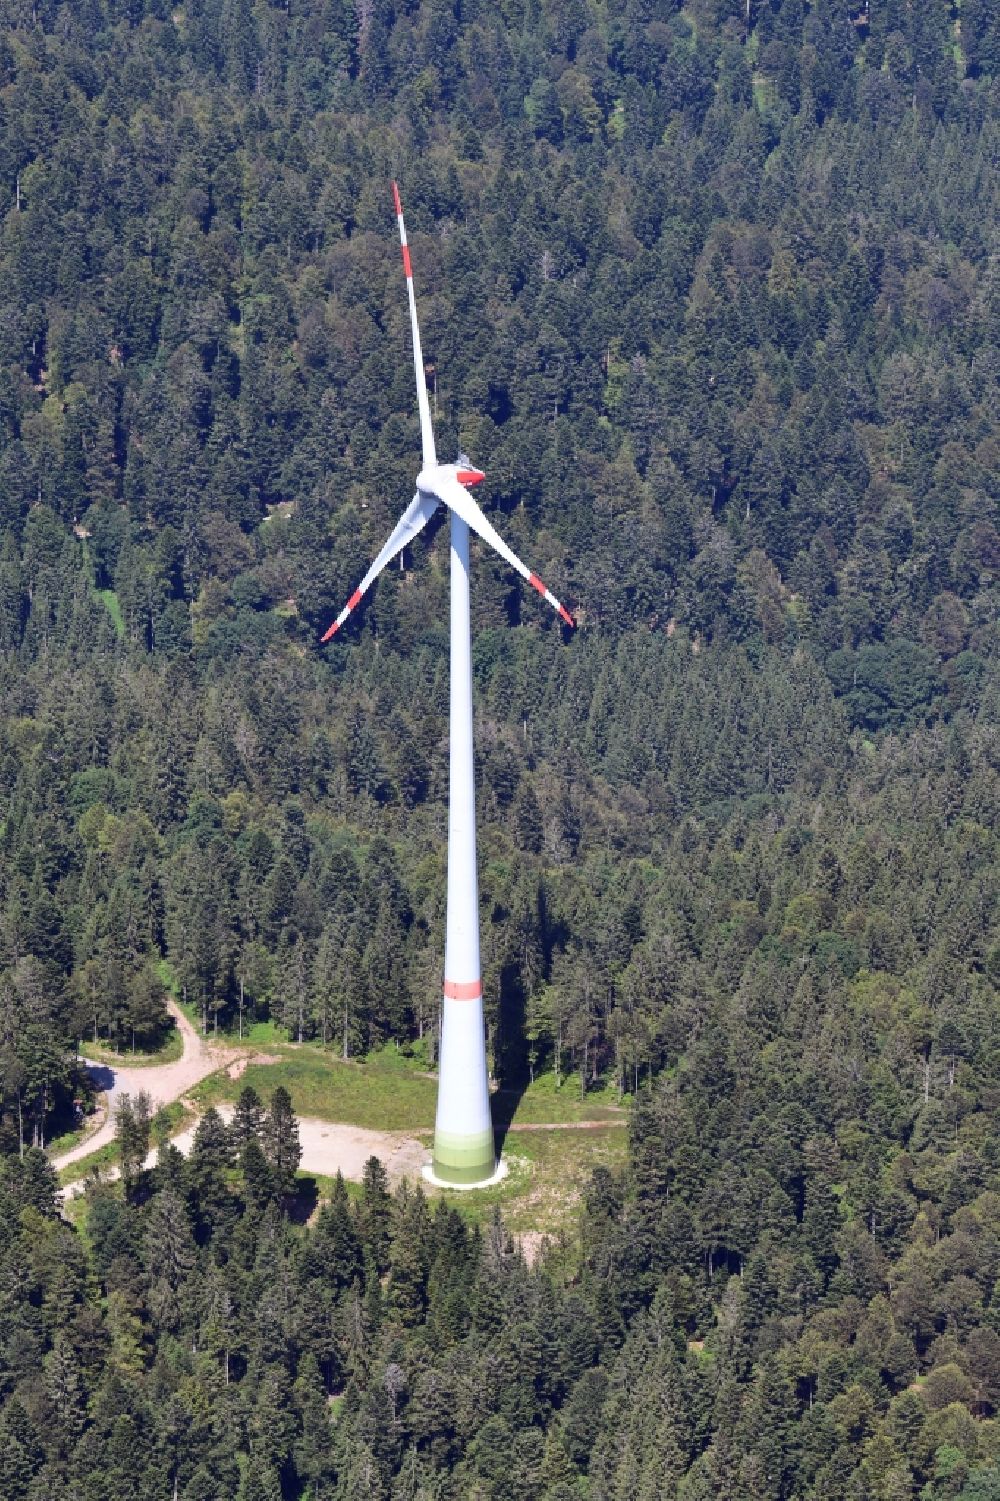 Schopfheim from above - A wind turbine on the Rohrenkopf, the local mountain of Gersbach, a district of Schopfheim in Baden-Wuerttemberg. It was the first wind farm in the south of the Black Forest